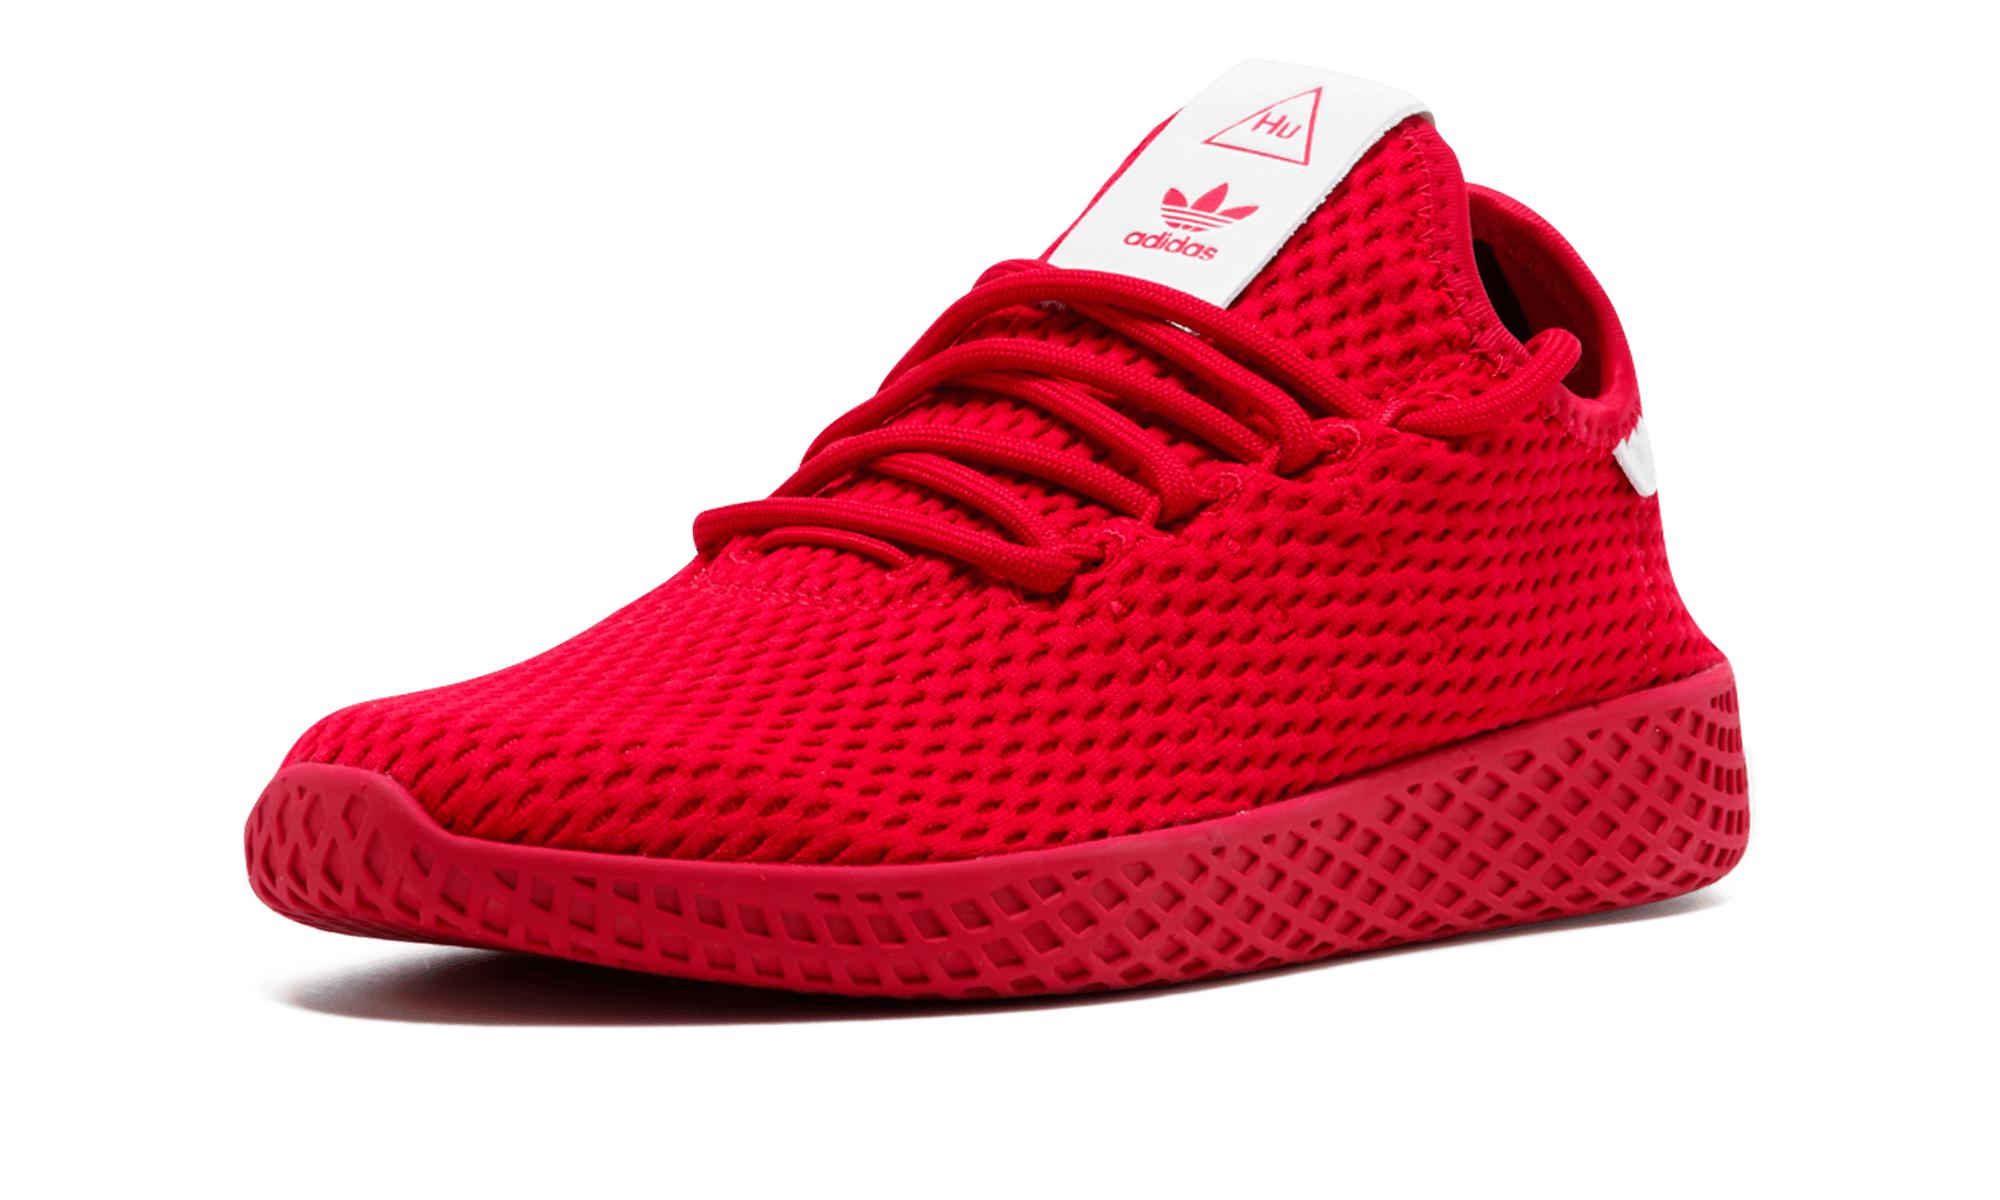 Adidas Pharrell Red Top Sellers, GET 50% OFF, dh-o.com